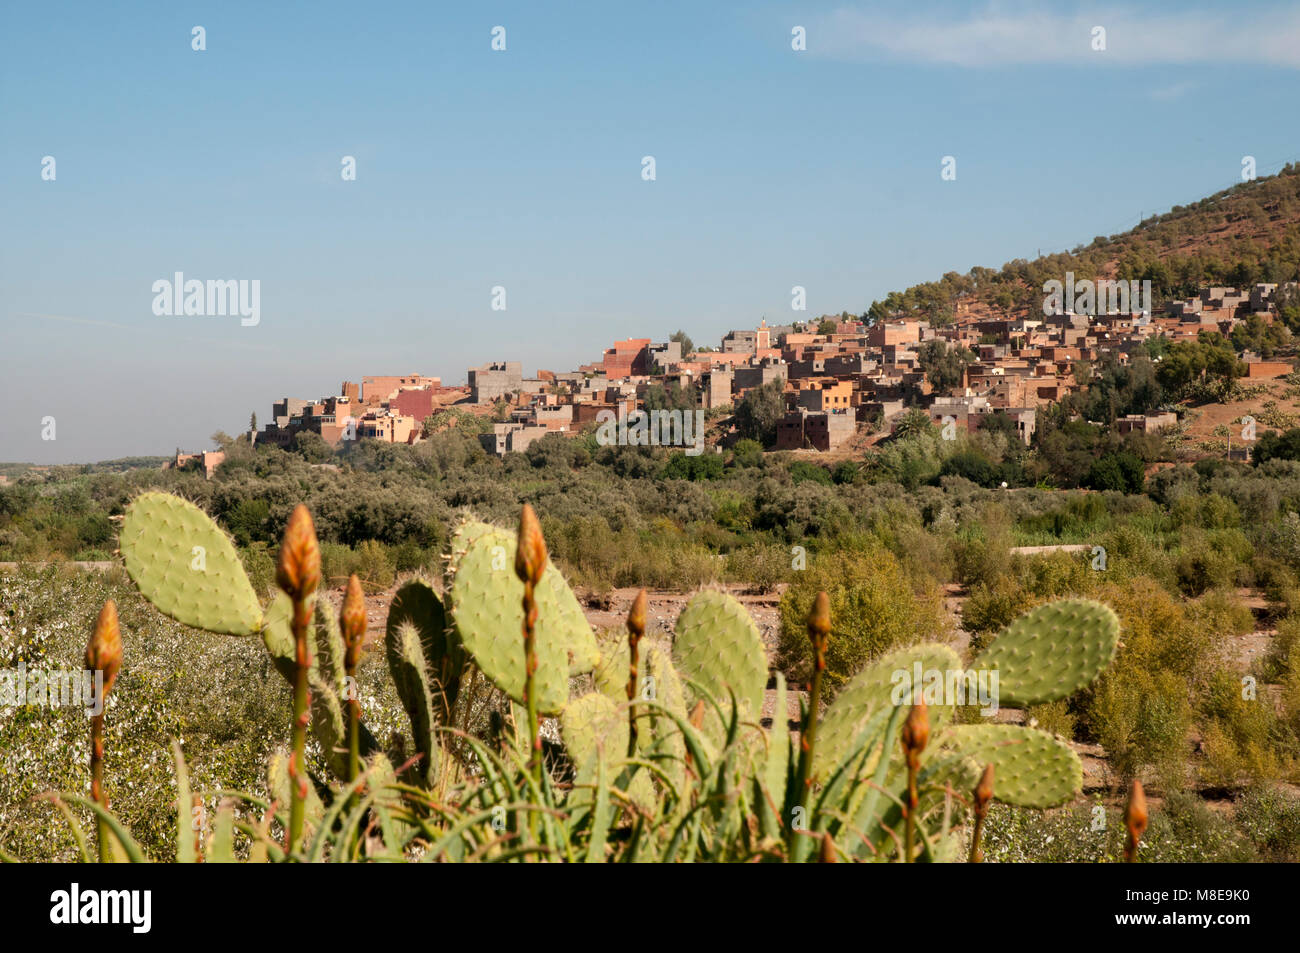 A hillside village at the foot of the Atlas mountains near Ourika, Morocco. Stock Photo